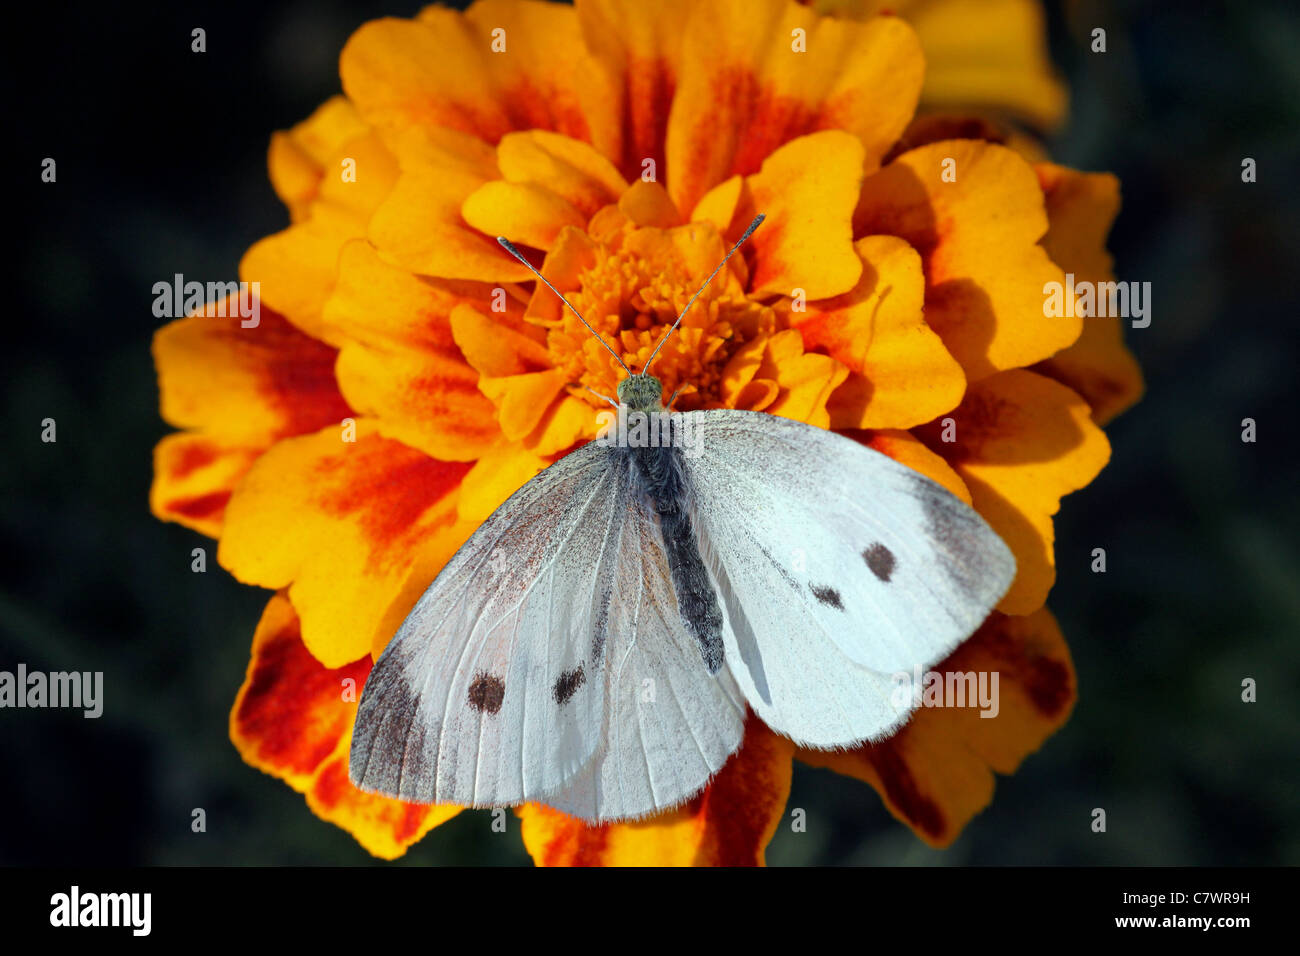 Chou blanc butterfly sitting on flower (marigold) Banque D'Images